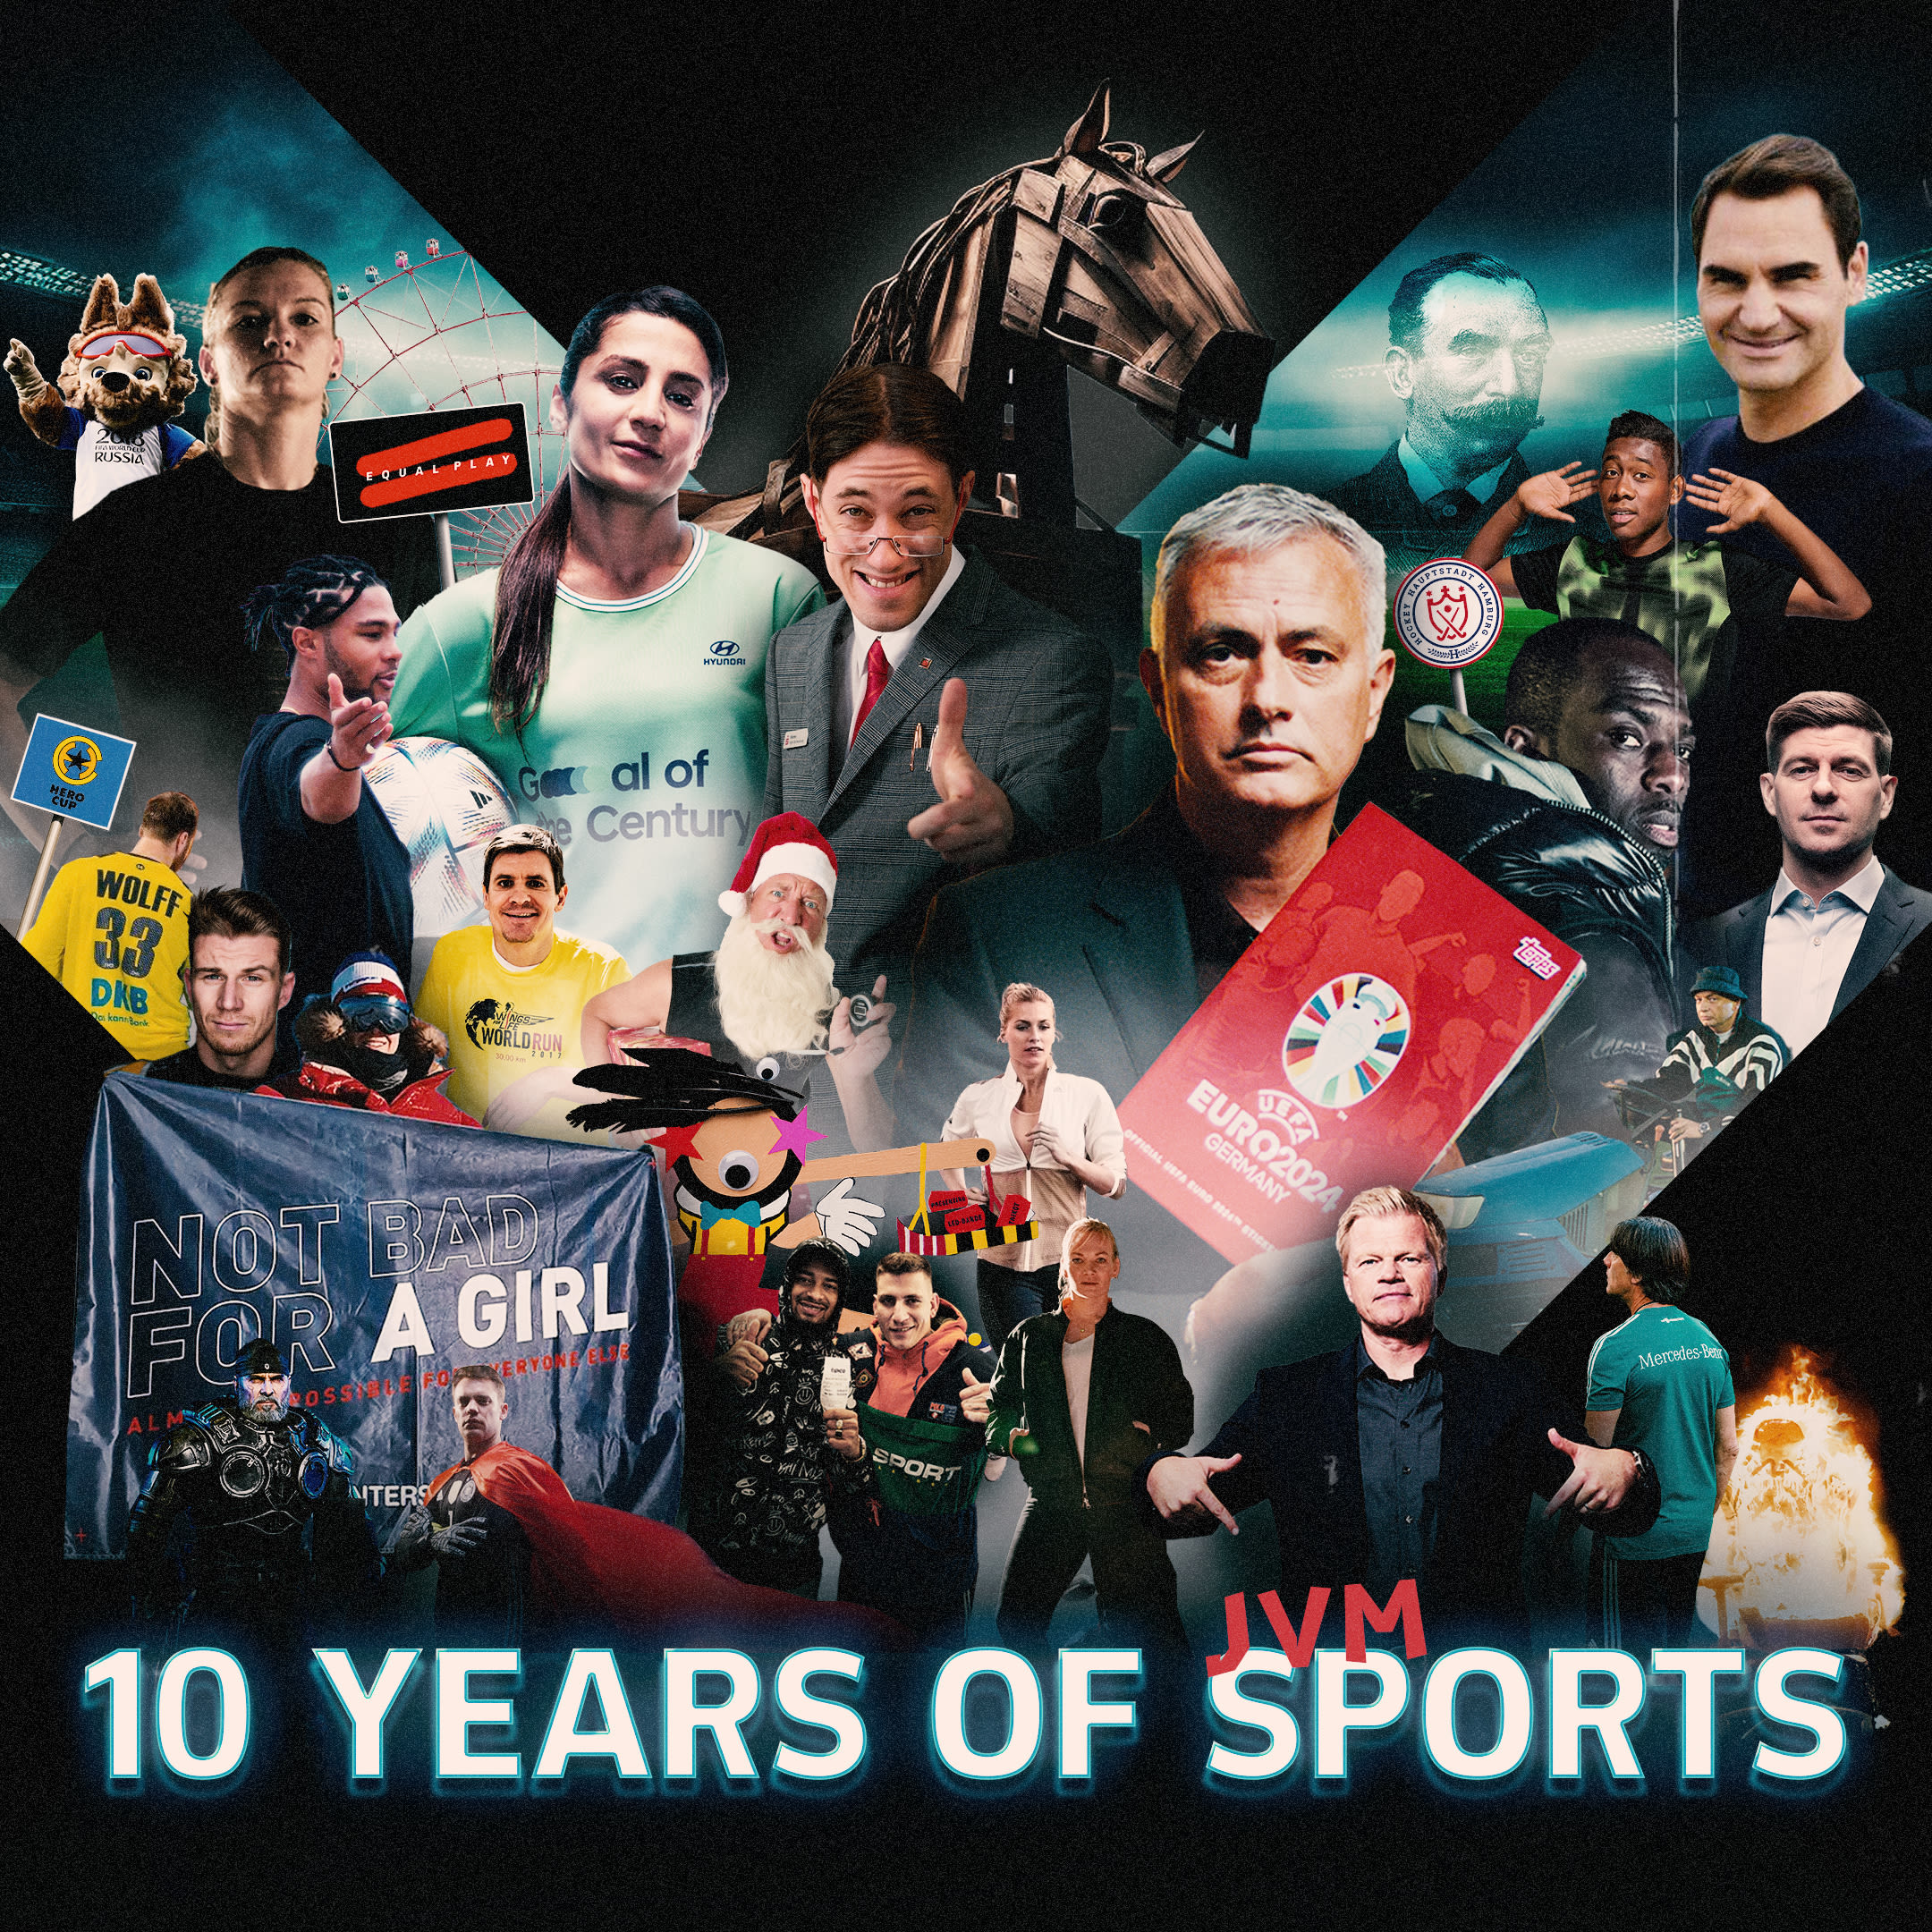 Collage representing 10 years of jvm sports, featuring various athletes, a coach, sports scenes, and iconic events.